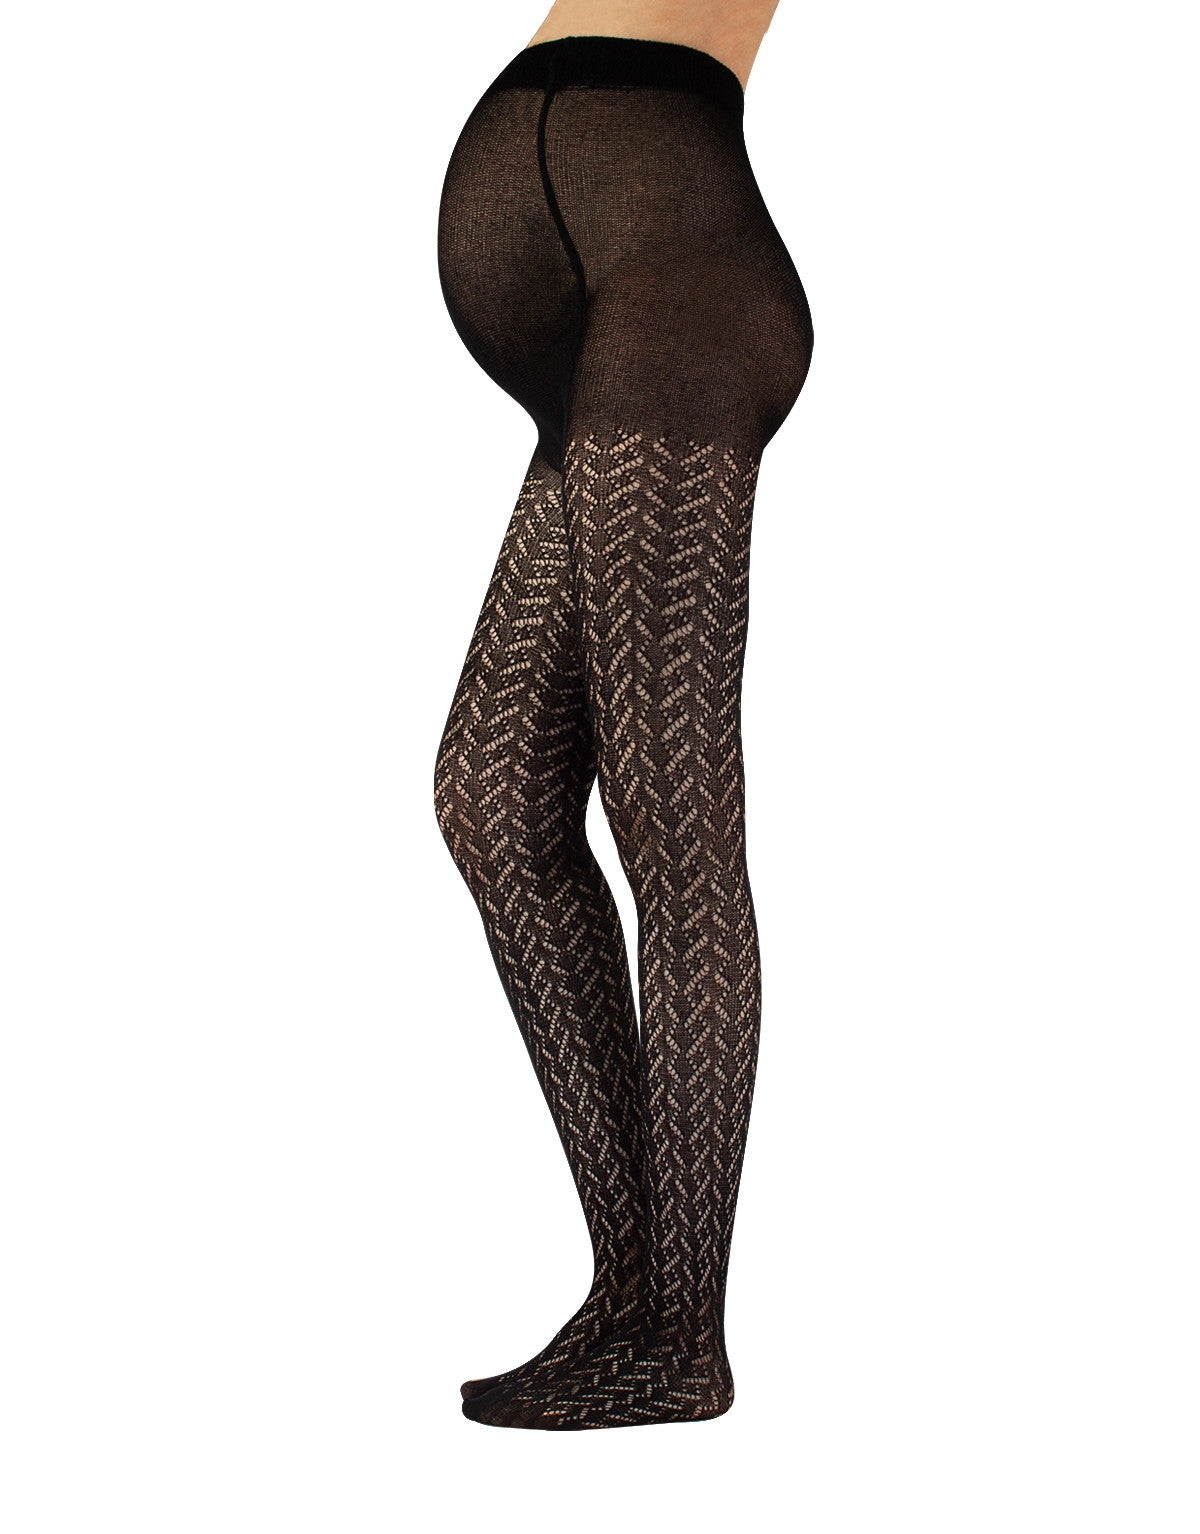 Calzitaly Crochet Maternity Tights - Black knitted cotton pregnancy fashion tights with an openwork cable knit style pattern, plain top, extra panel, flat seams and plain toe.